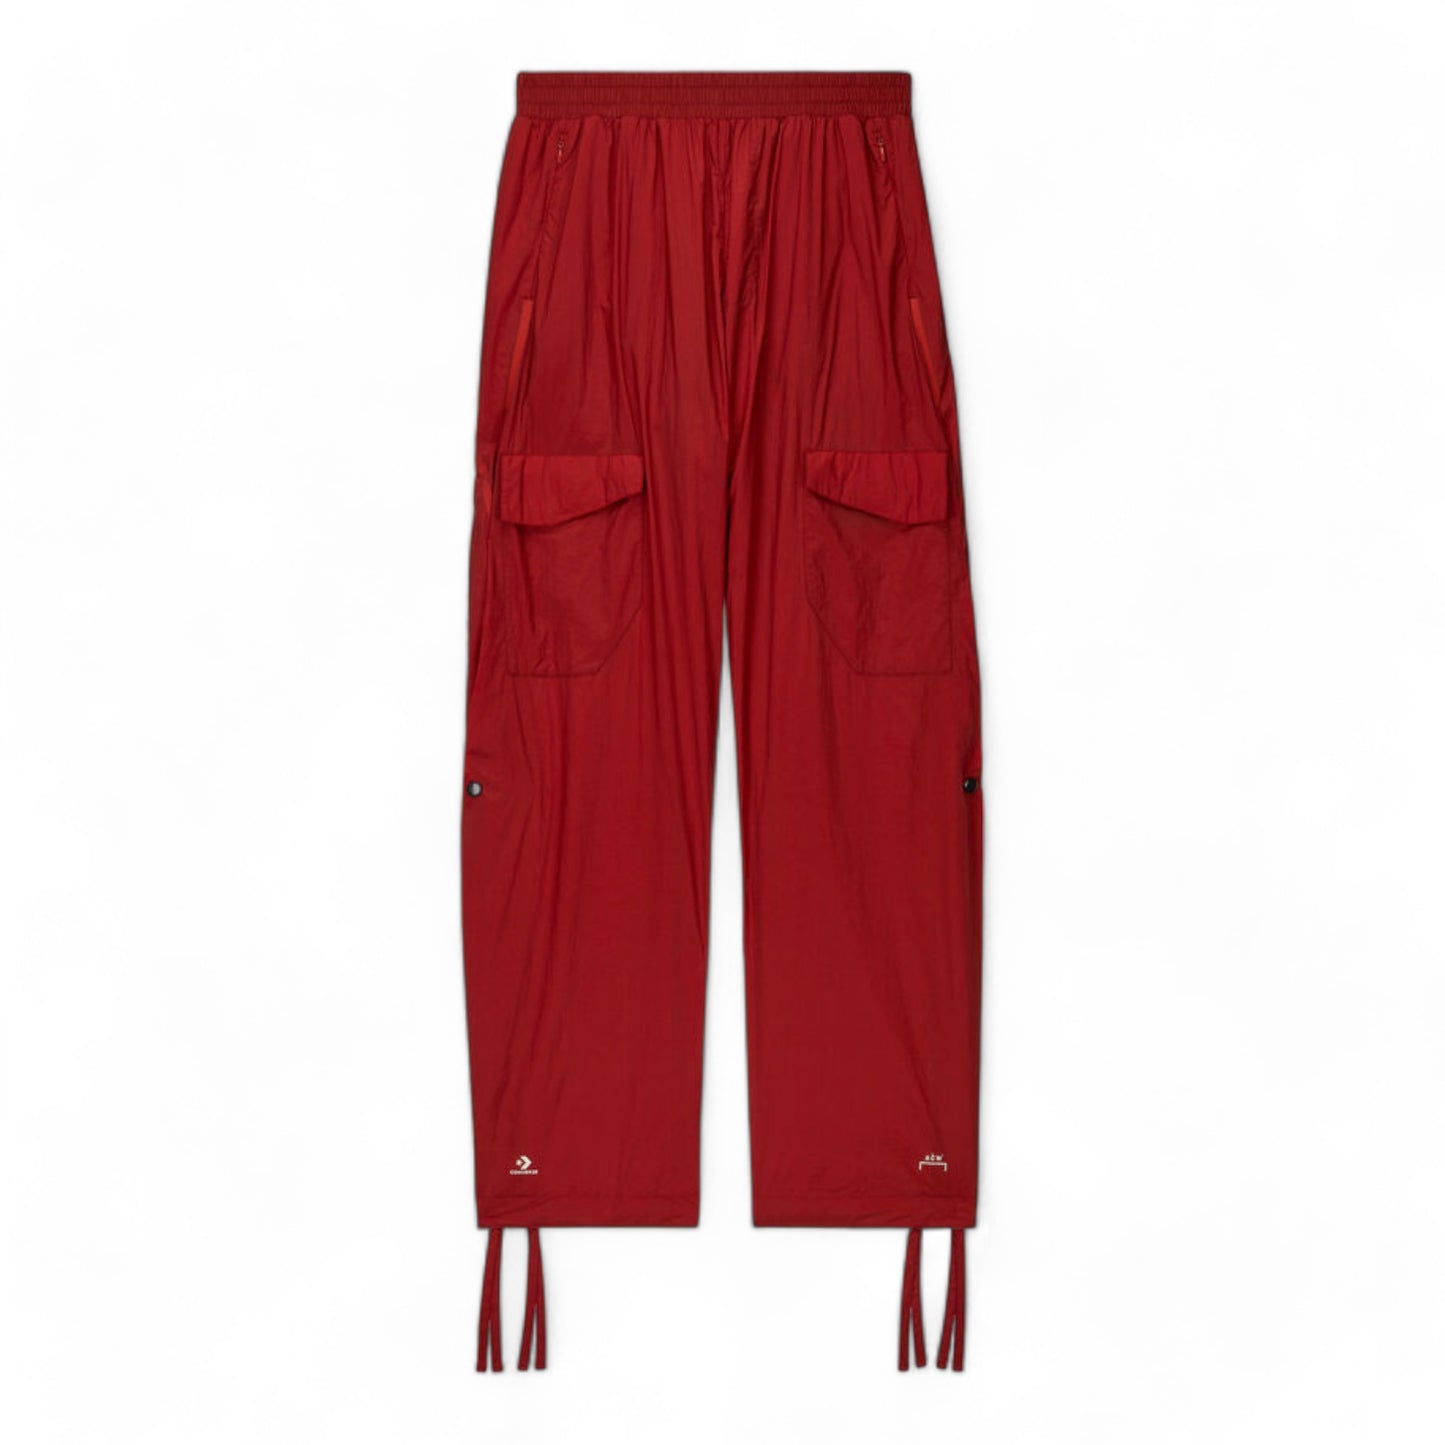 CONVERSE x A-COLD-WALL REVERSIBLE GALE PANT